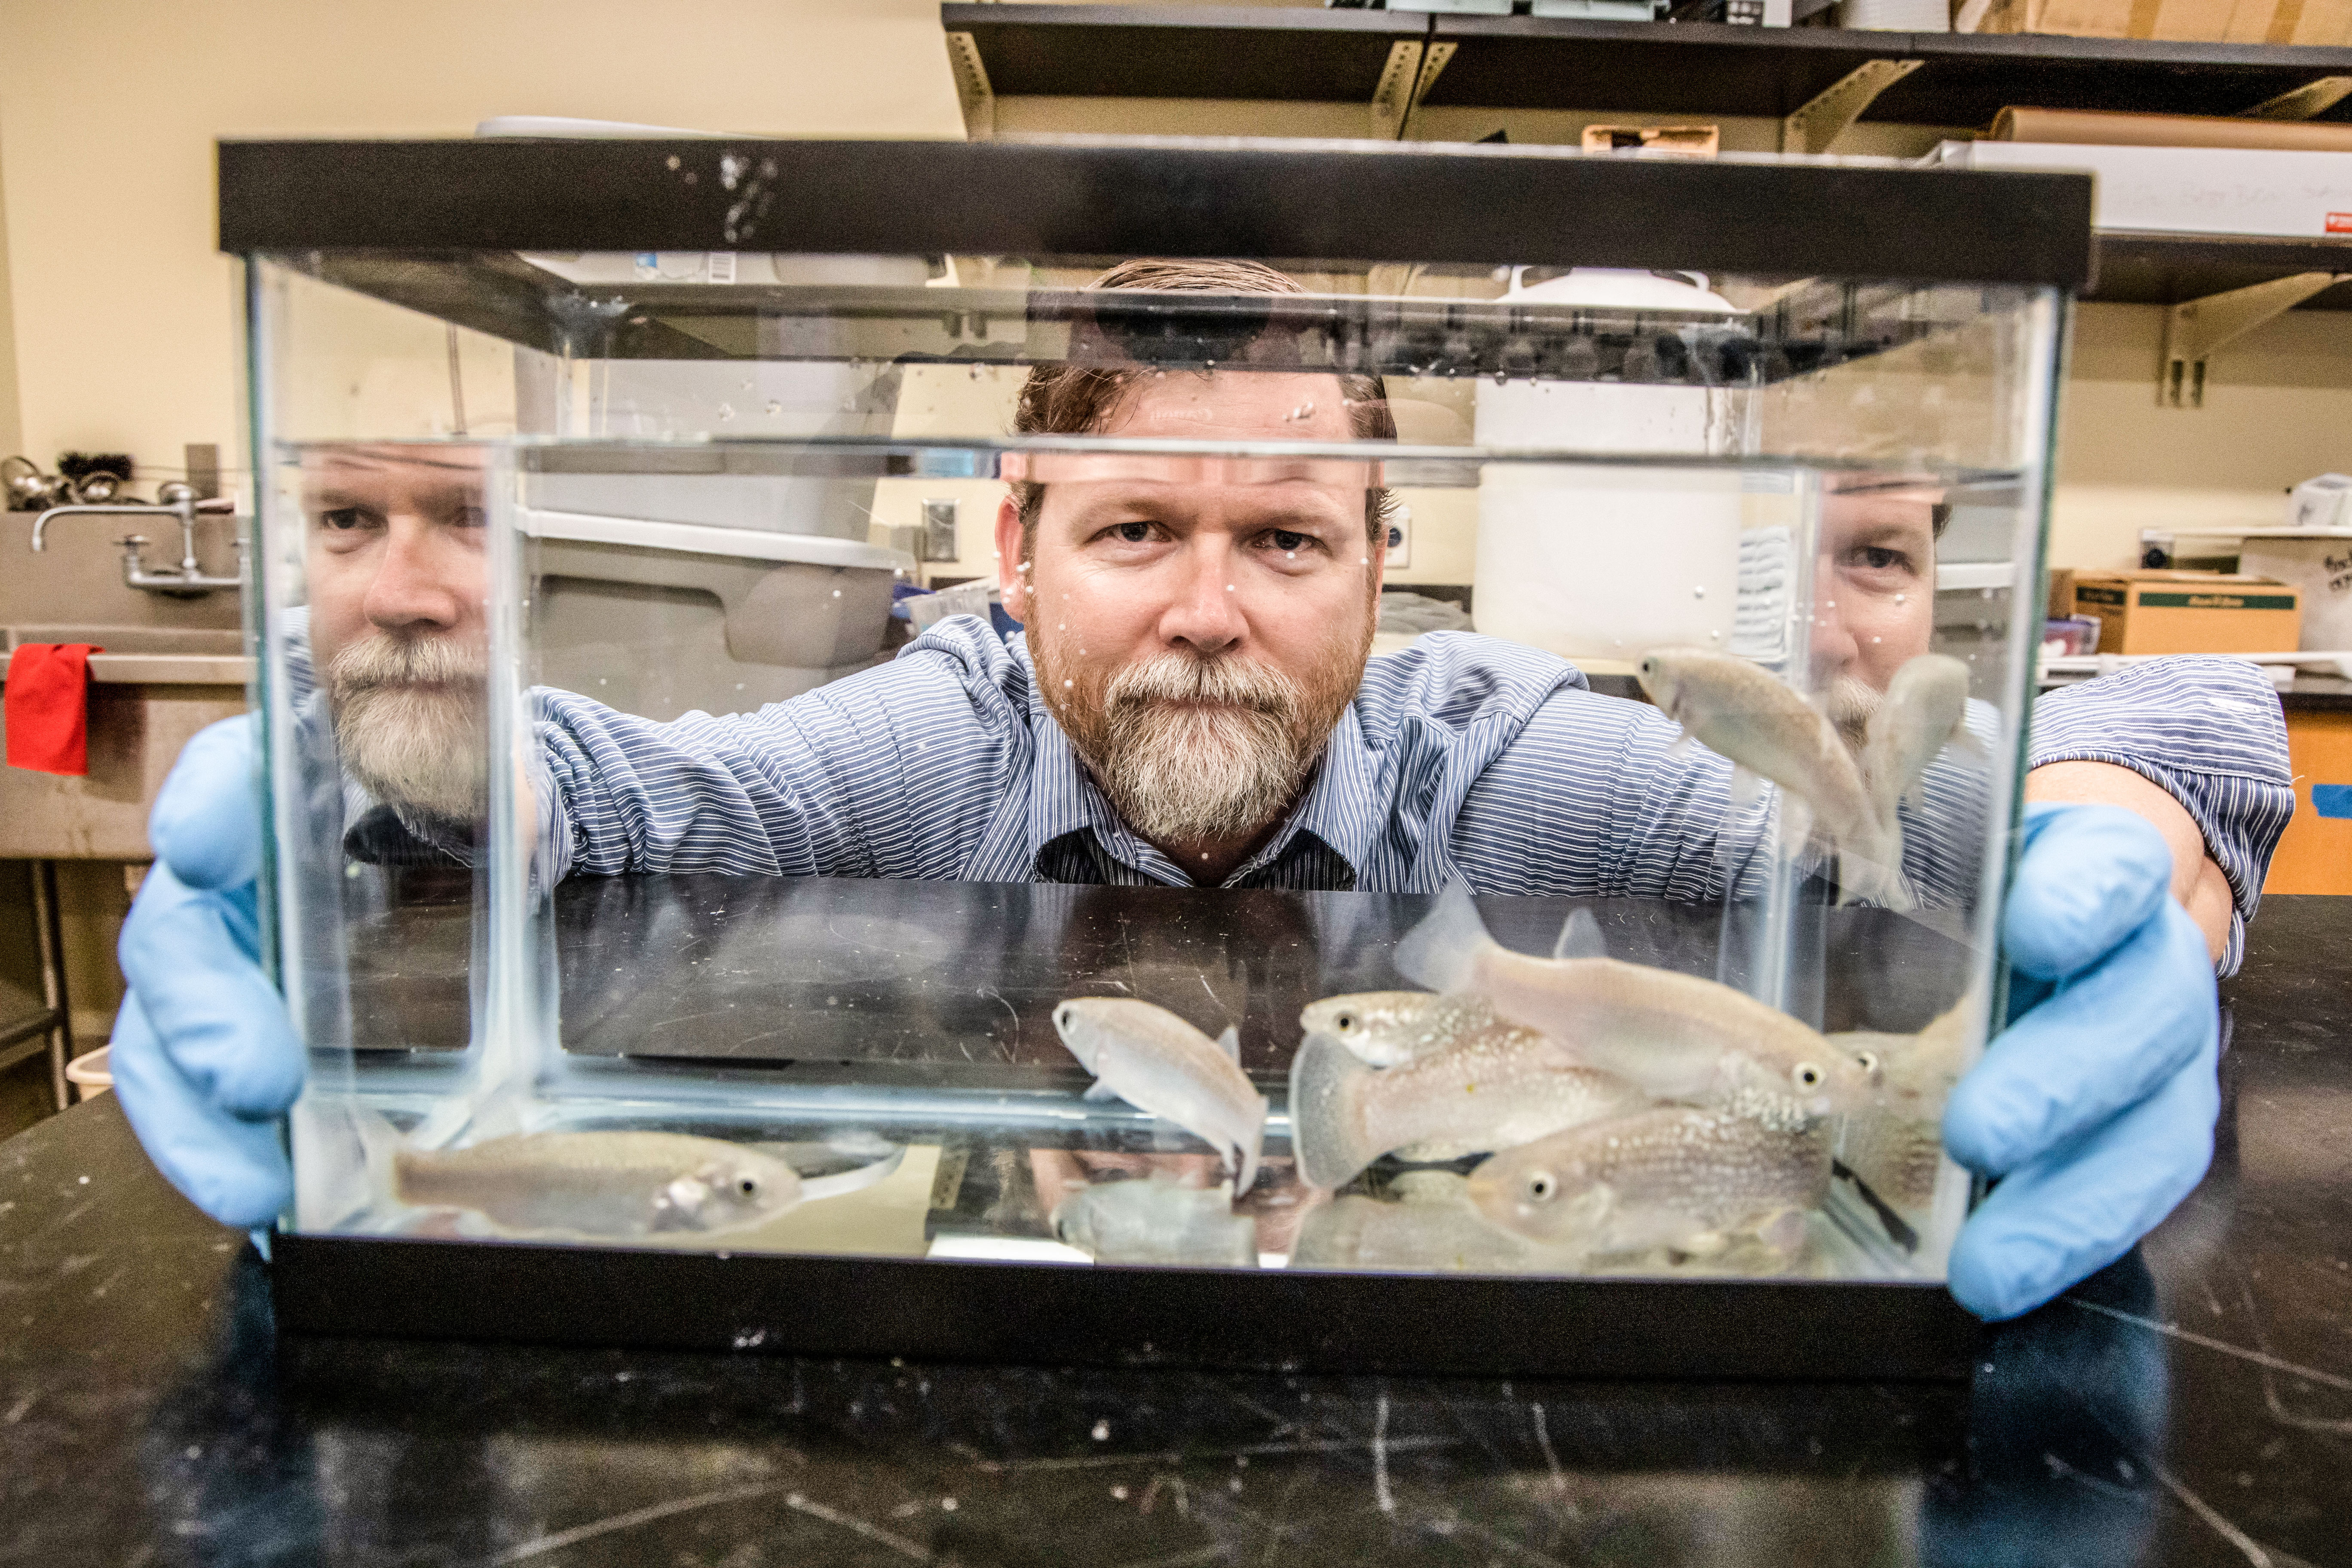 Cole Matson, PhD, associate professor of environmental science and a member of the Center for Reservoir and Aquatic Systems Research (CRASR) at Baylor